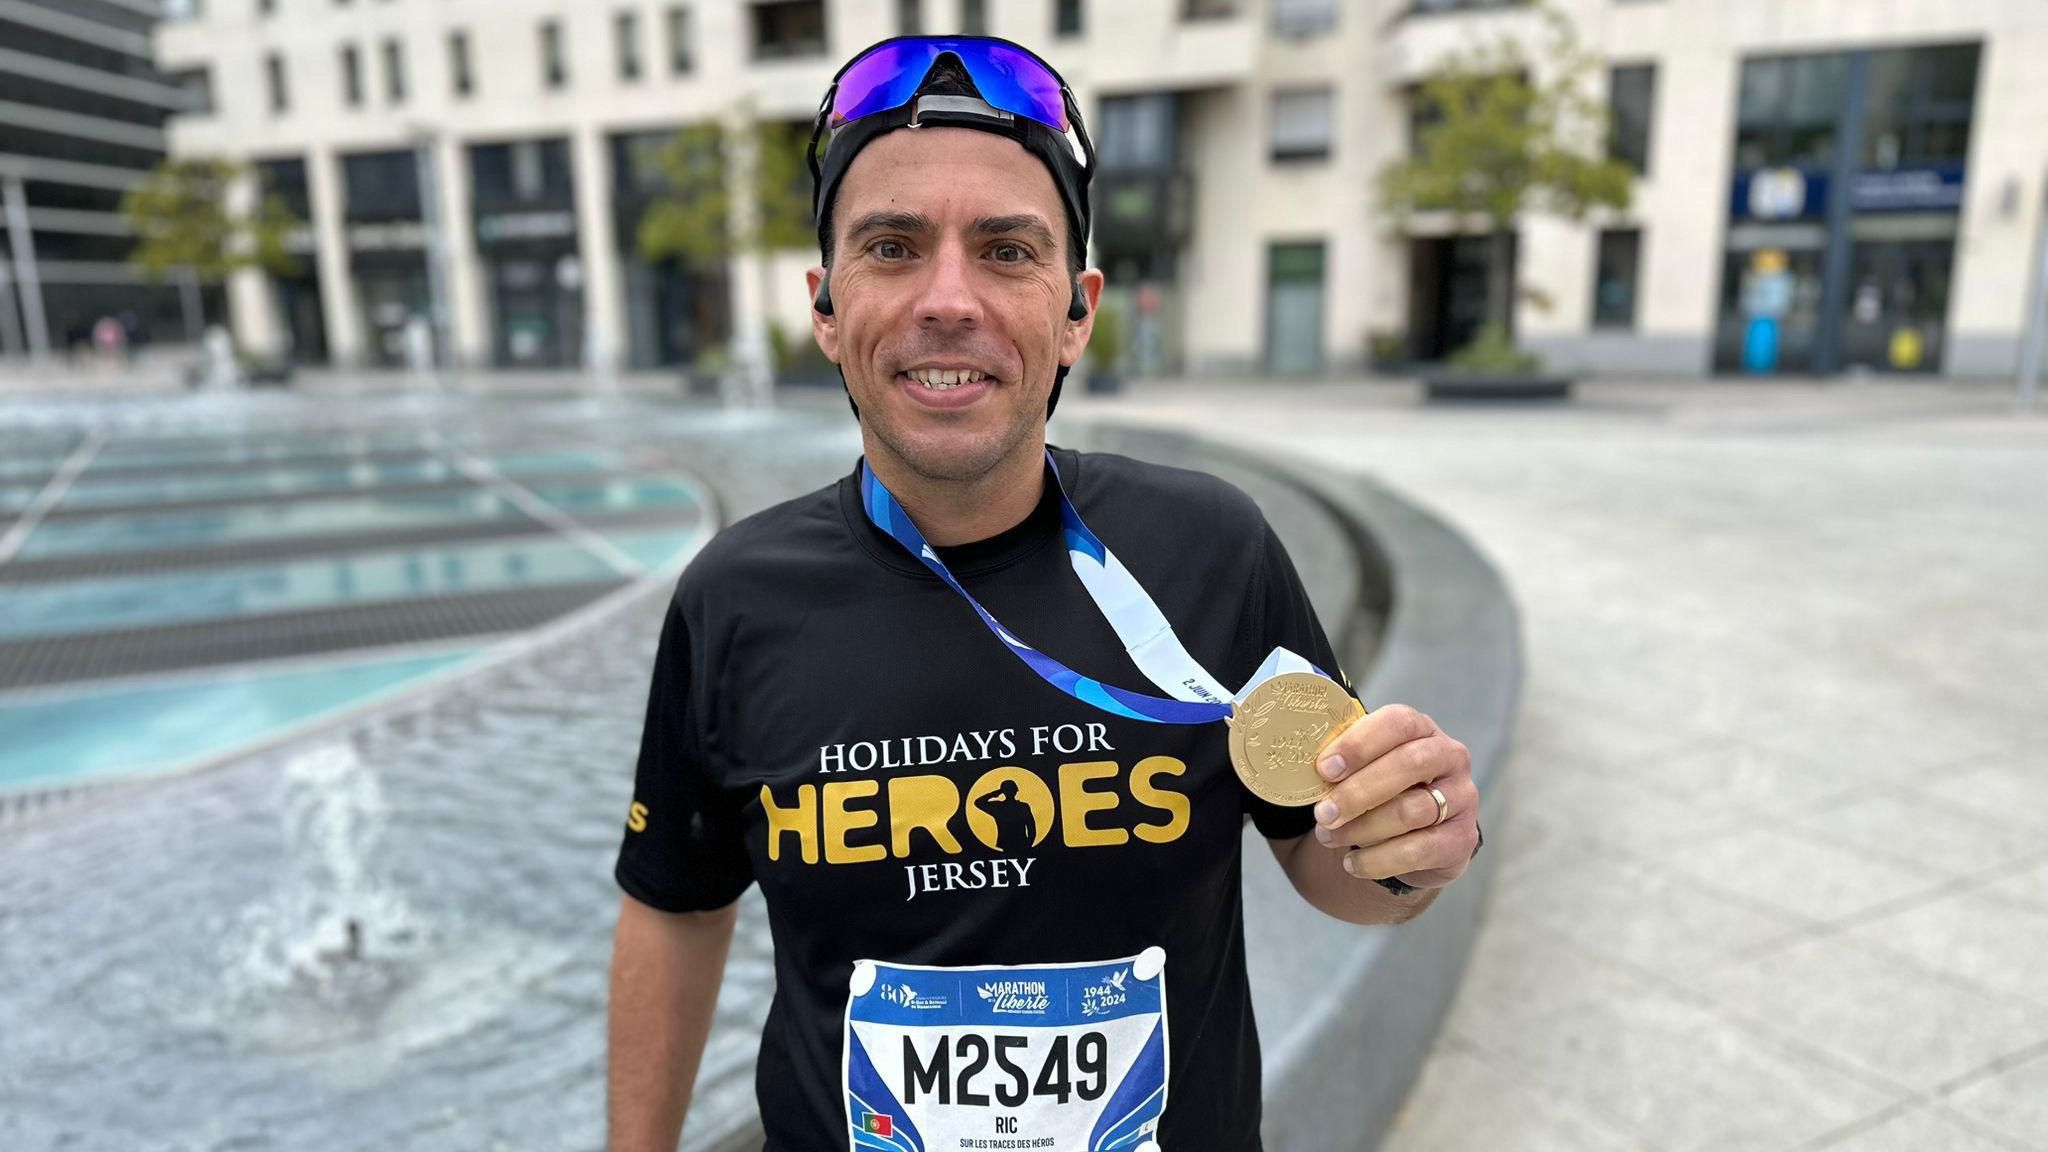 Ricardo smiles at the camera with his medal around his neck and he is wearing a Holidays for Heroes Jersey running top